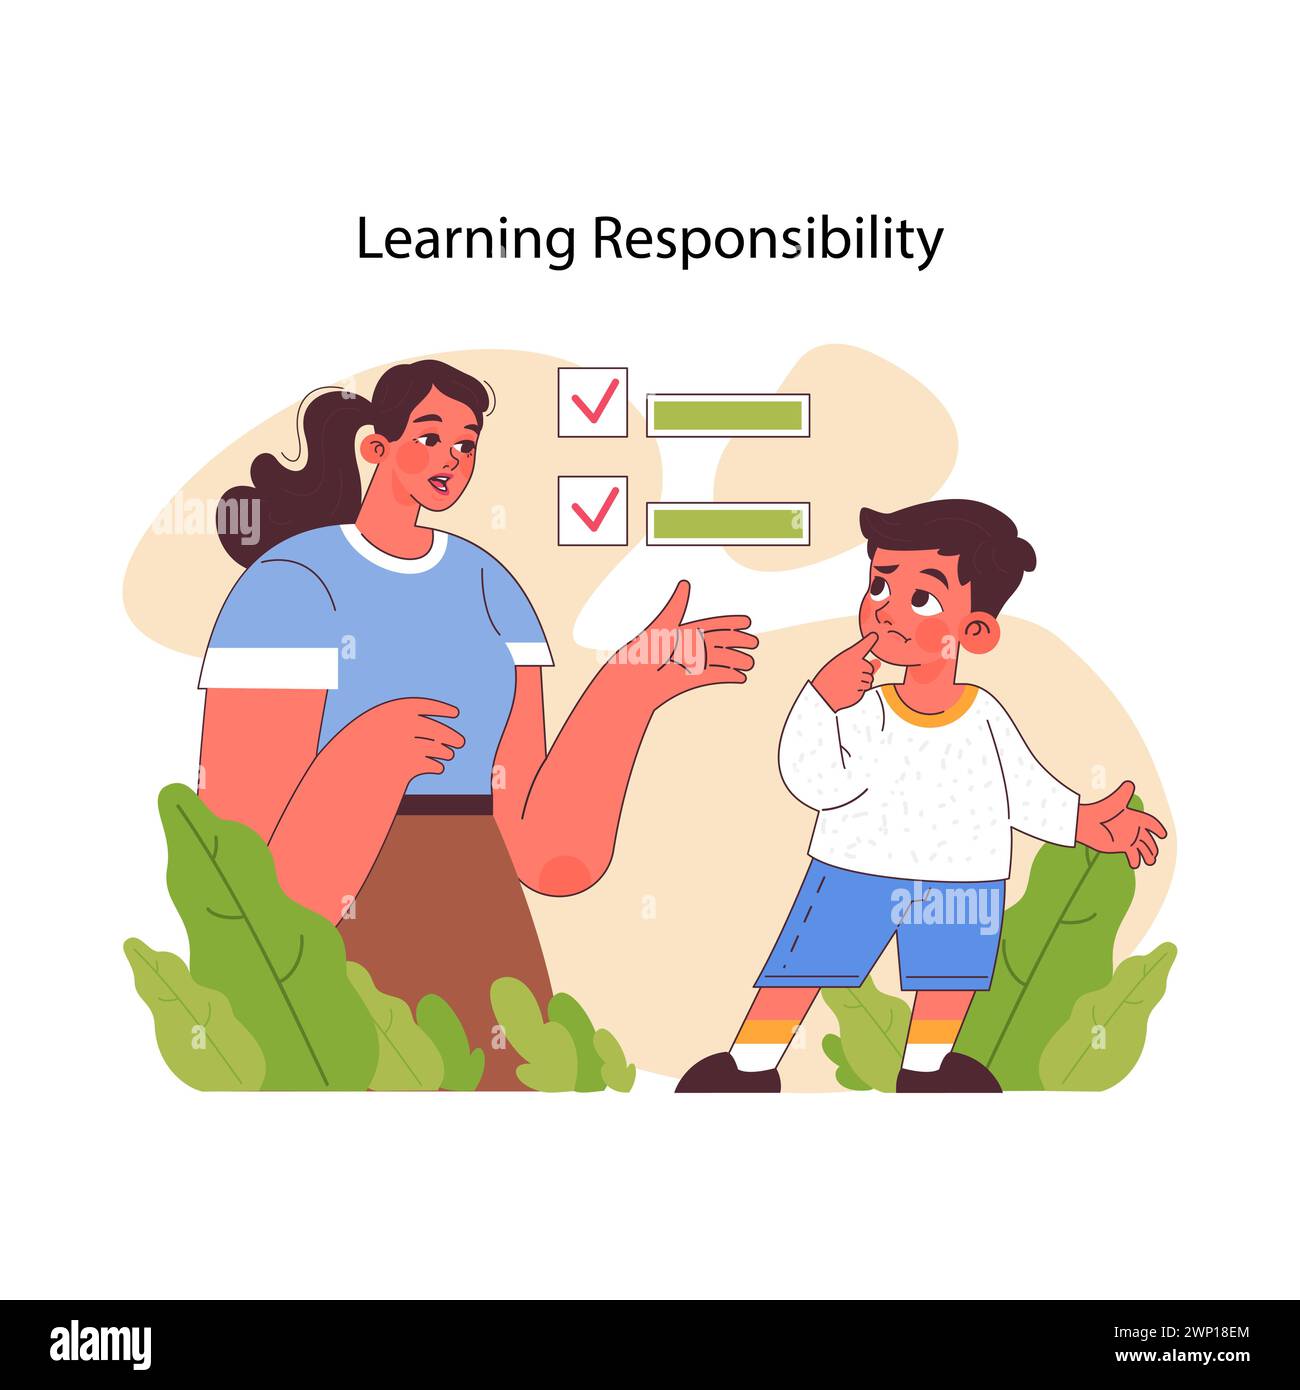 Learning Responsibility concept. A thoughtful boy considers advice from a guiding adult on task management, reflecting on the steps to responsible behavior. A story of mentorship and growing up Stock Vector